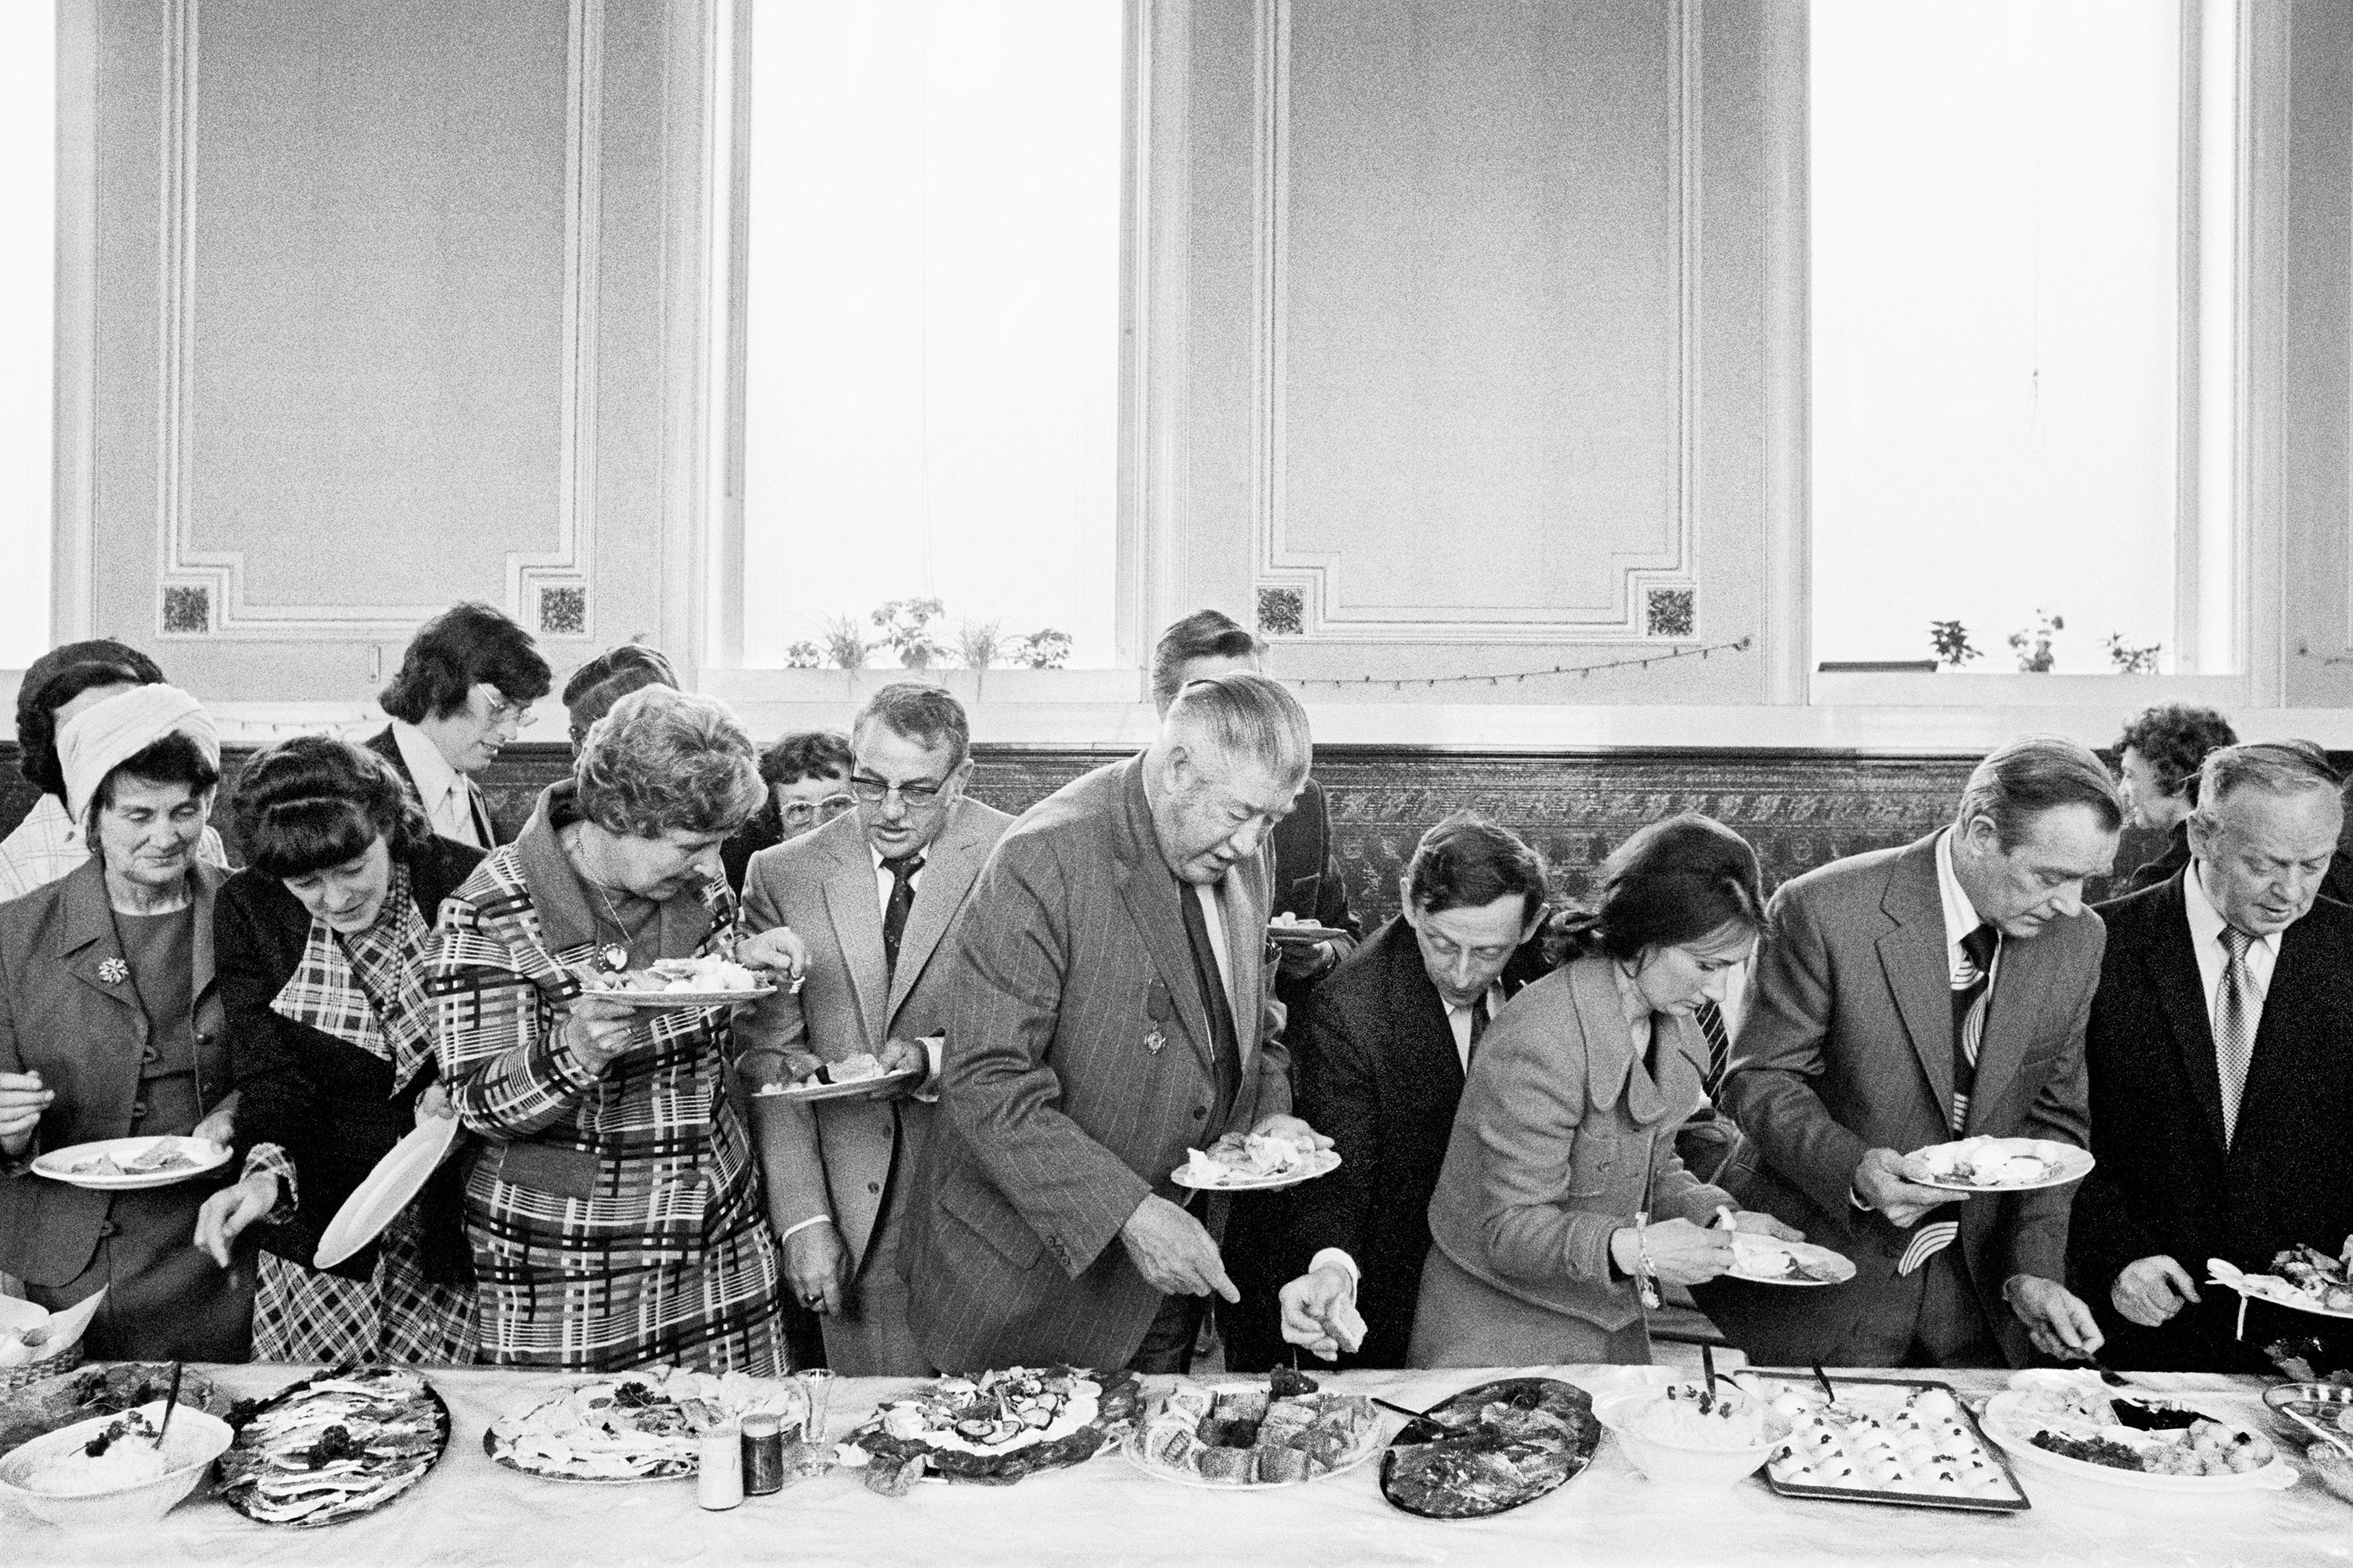 web Mayor of Todmorden’s inaugural banquet, Todmorden, West Yorkshire, England, 1977 by Martin Parr